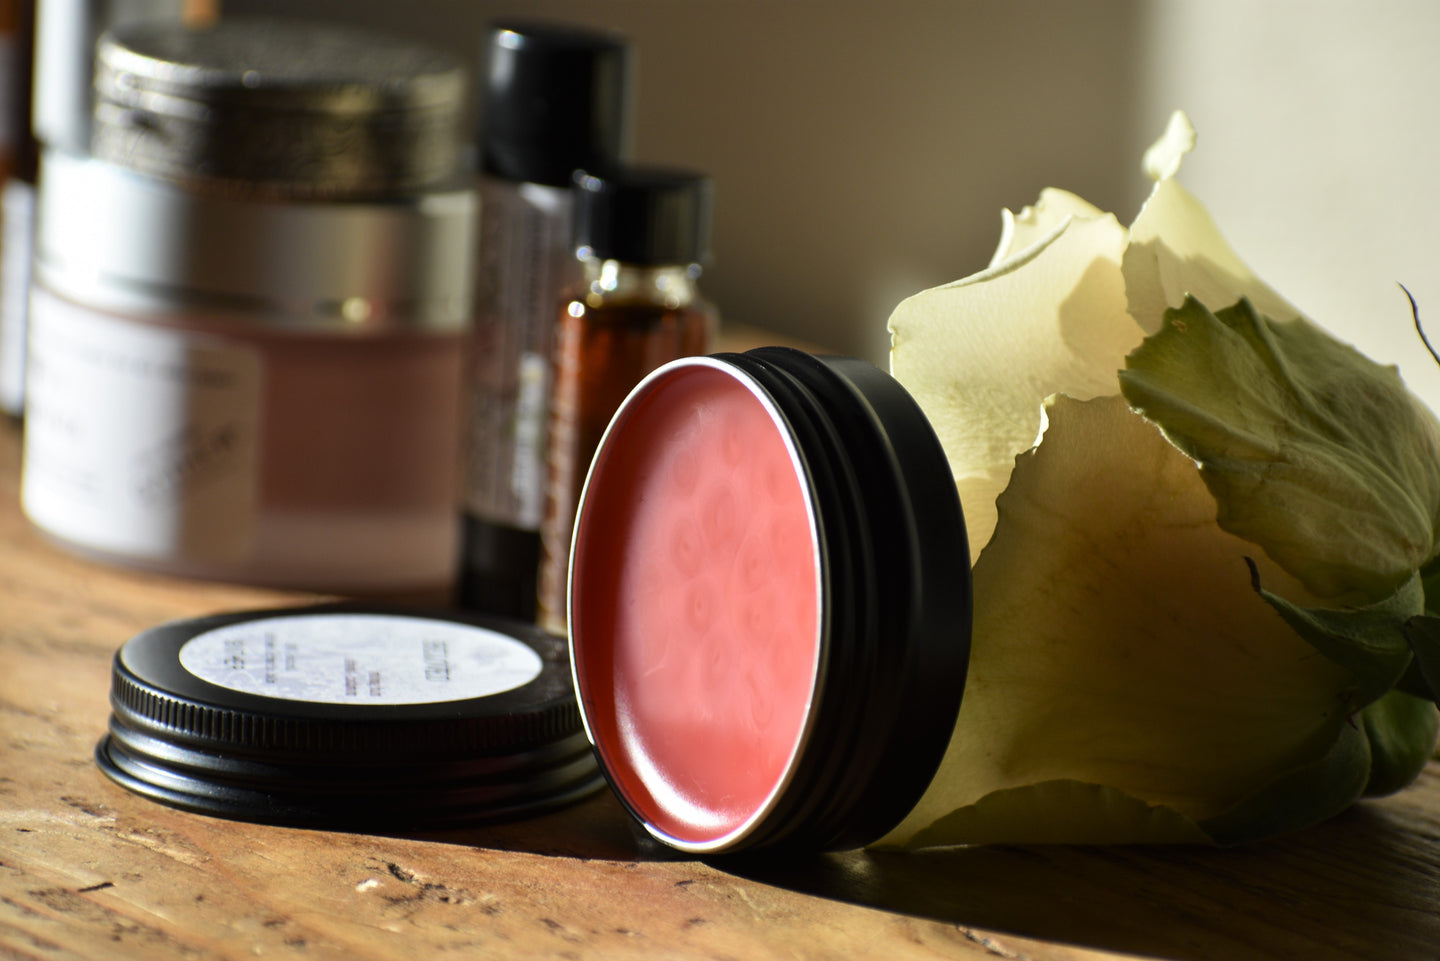 Beloved balm by Gather, intentional touch